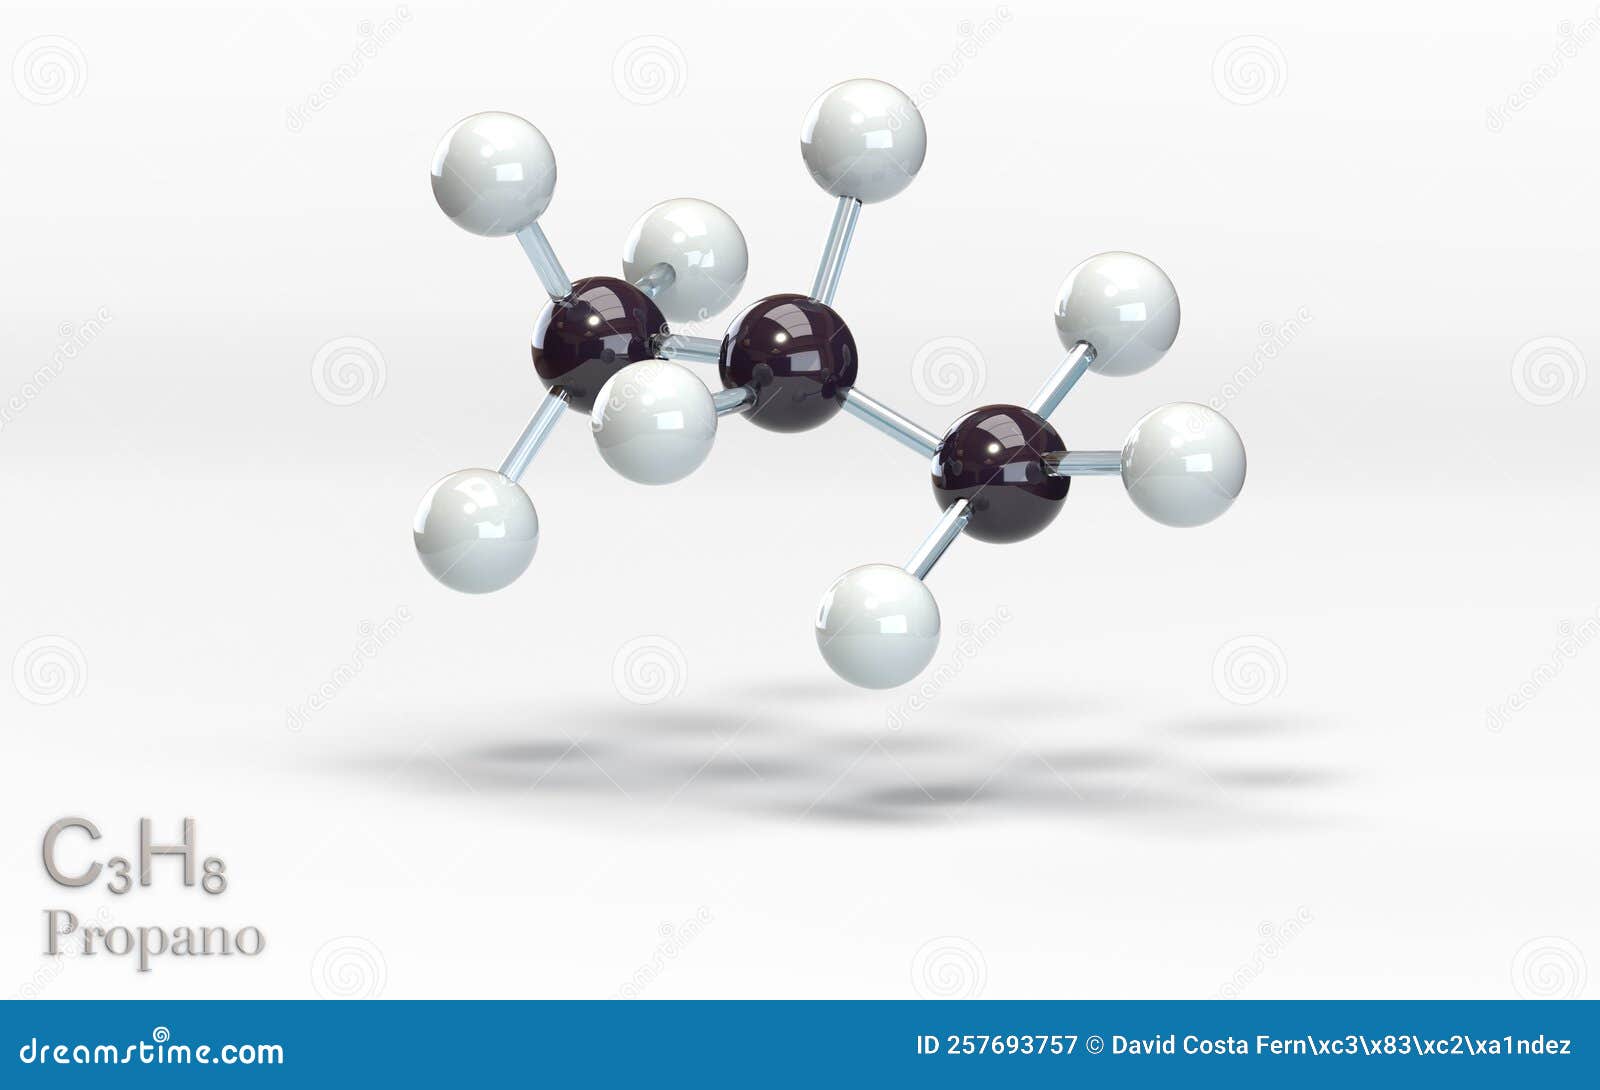 c3h8 propano. molecule with hydrogen and carbon atoms. 3d rendering